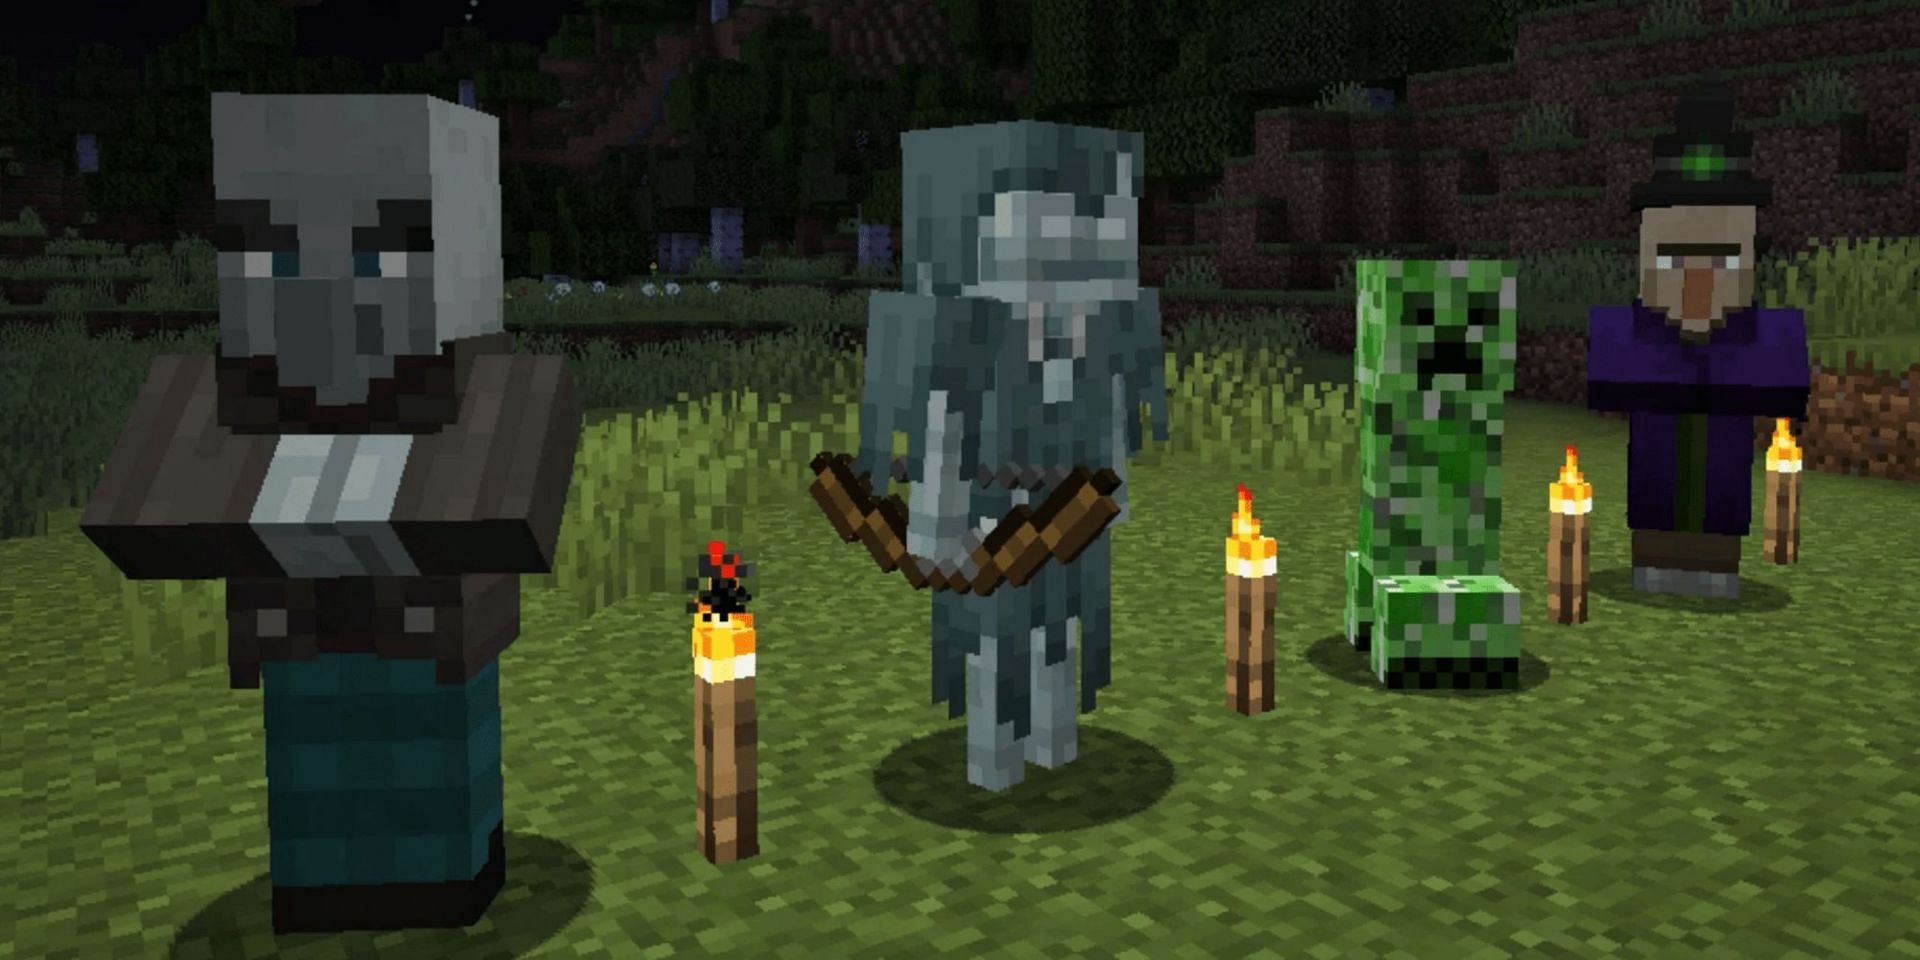 Some Minecraft mobs should be treated cautiously due to their dangerous powers (Image via Mojang)